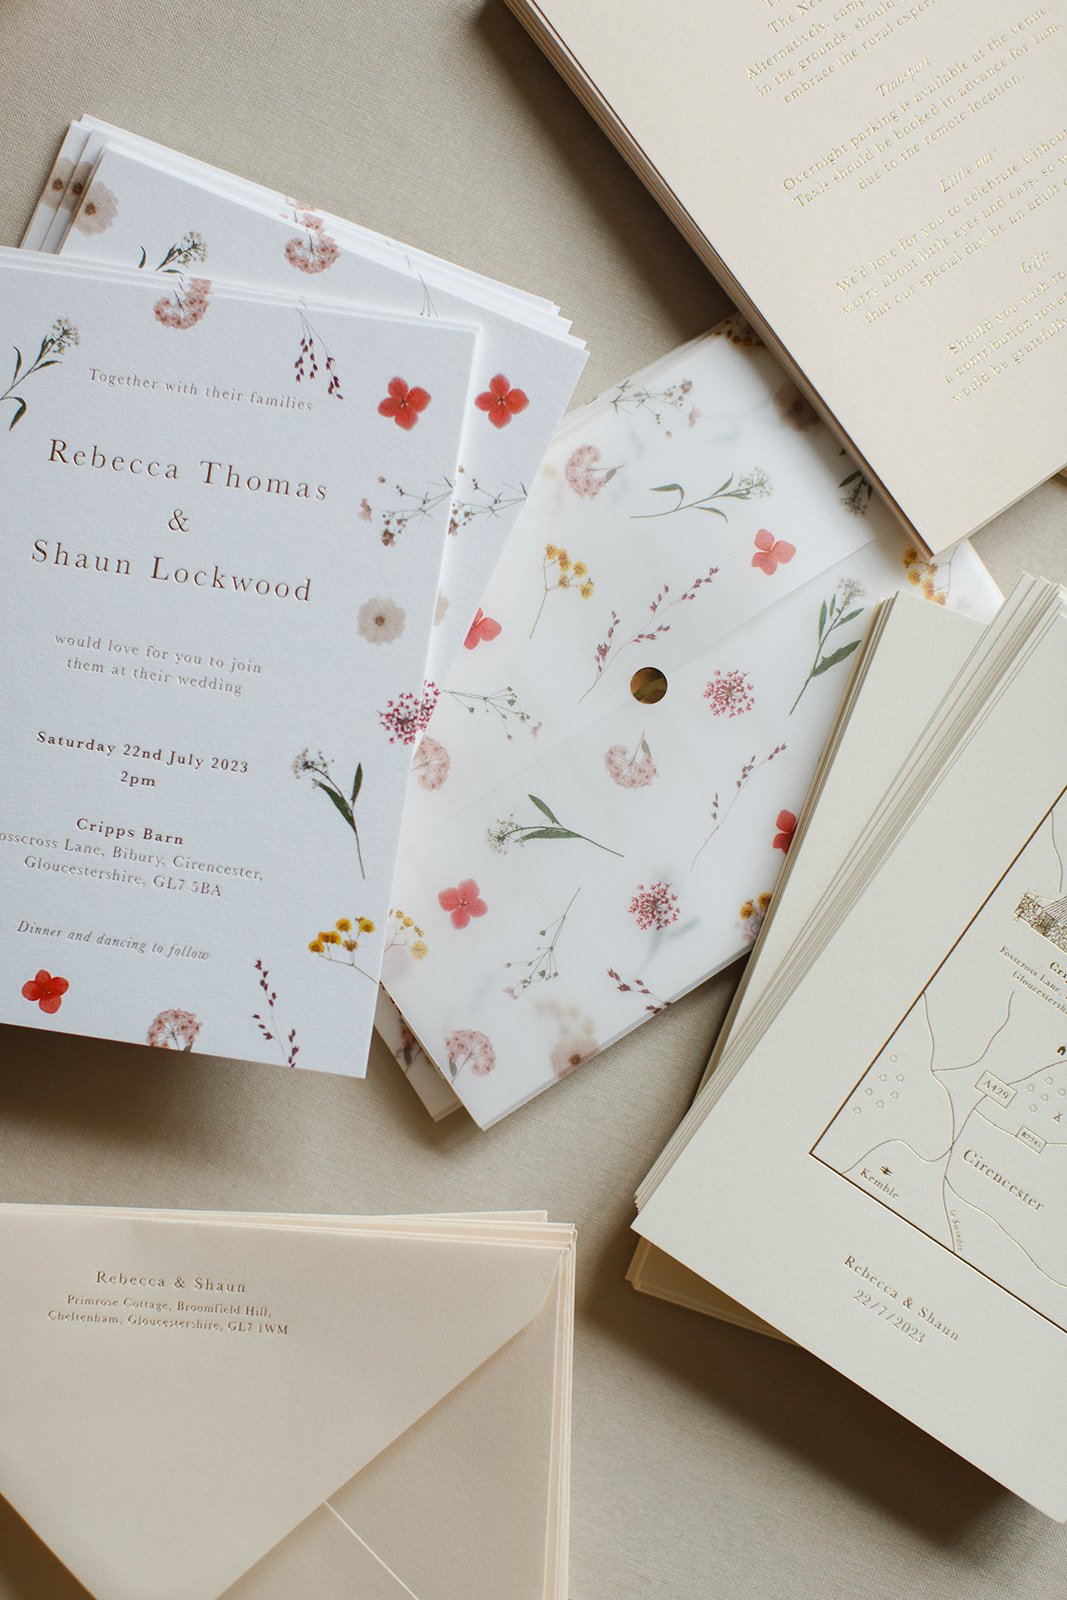 Floral wedding stationery designed with a colourful palette of pressed flowers